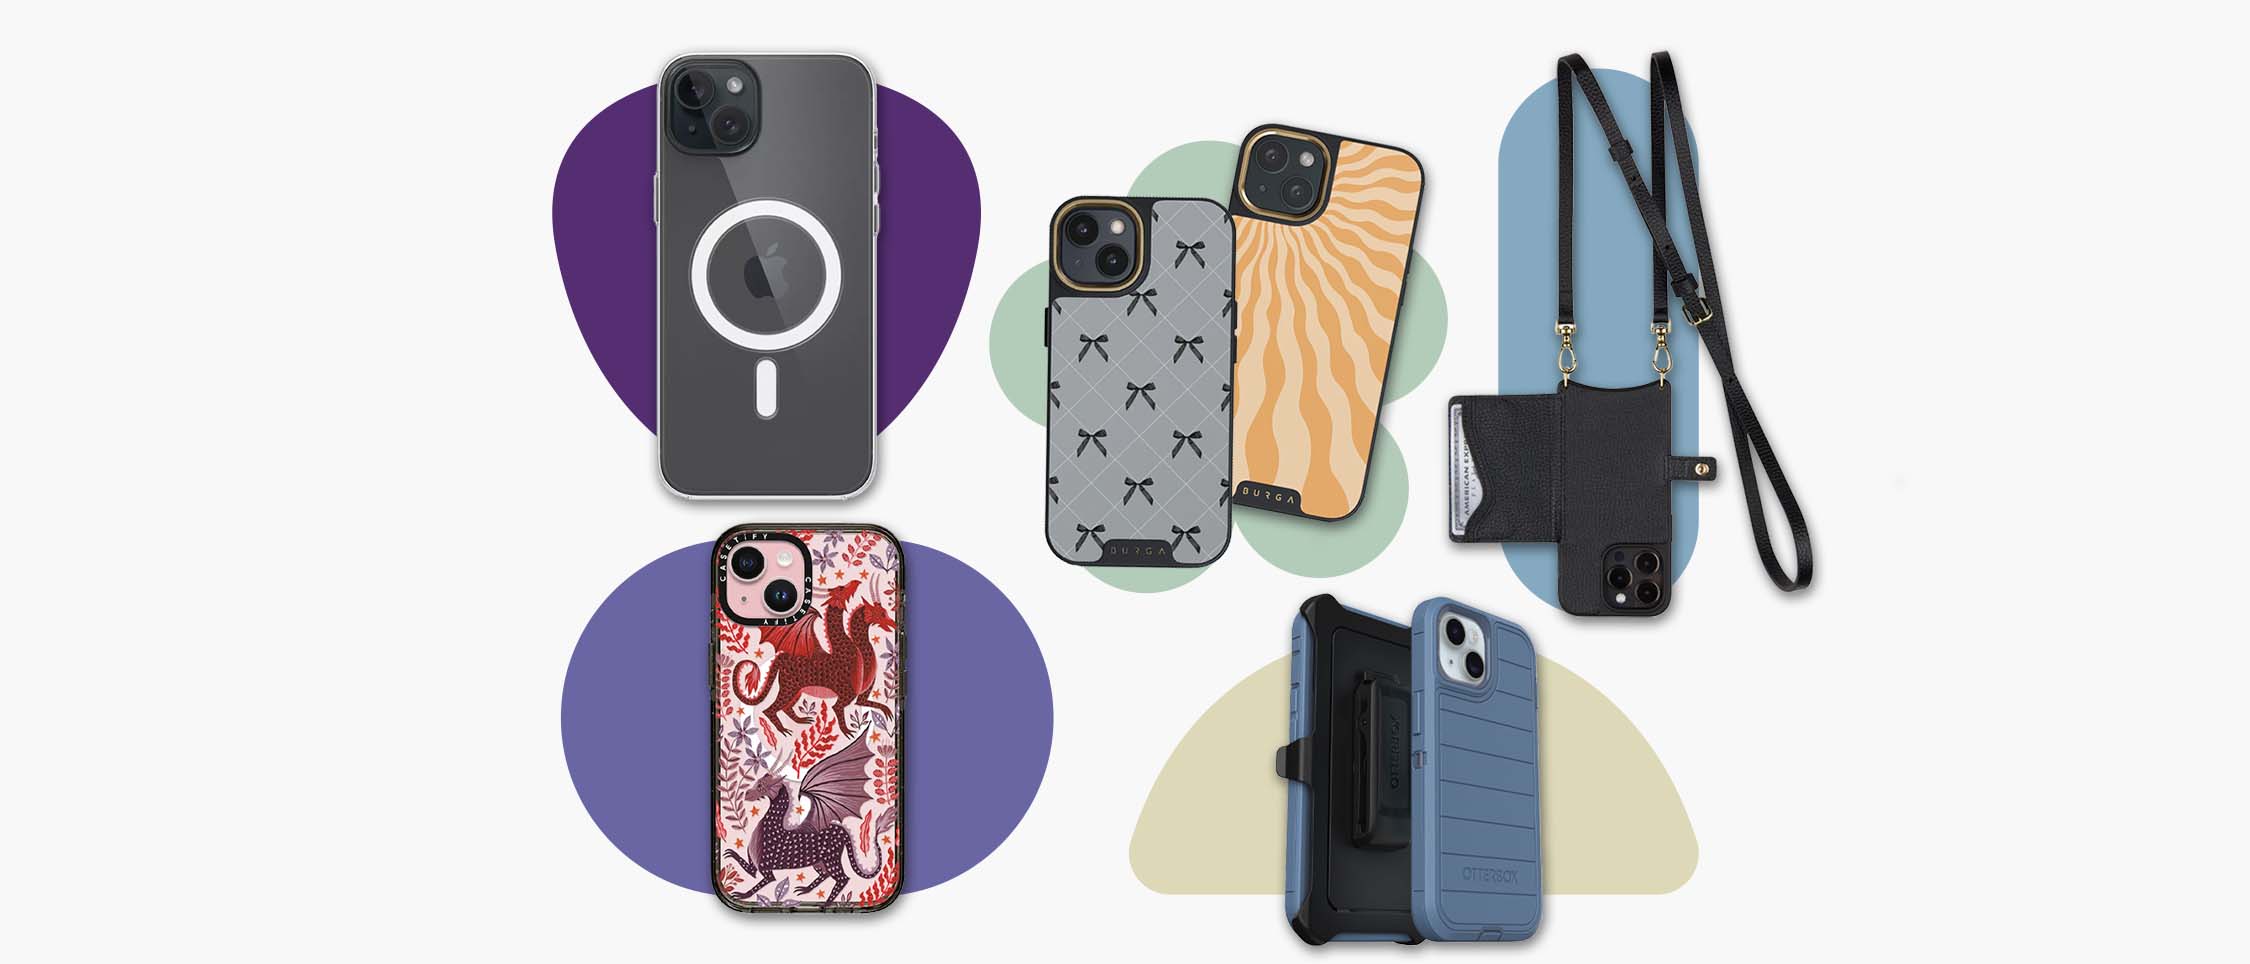 iphone cases from apple, burga, casetify, otterbox and bandolier